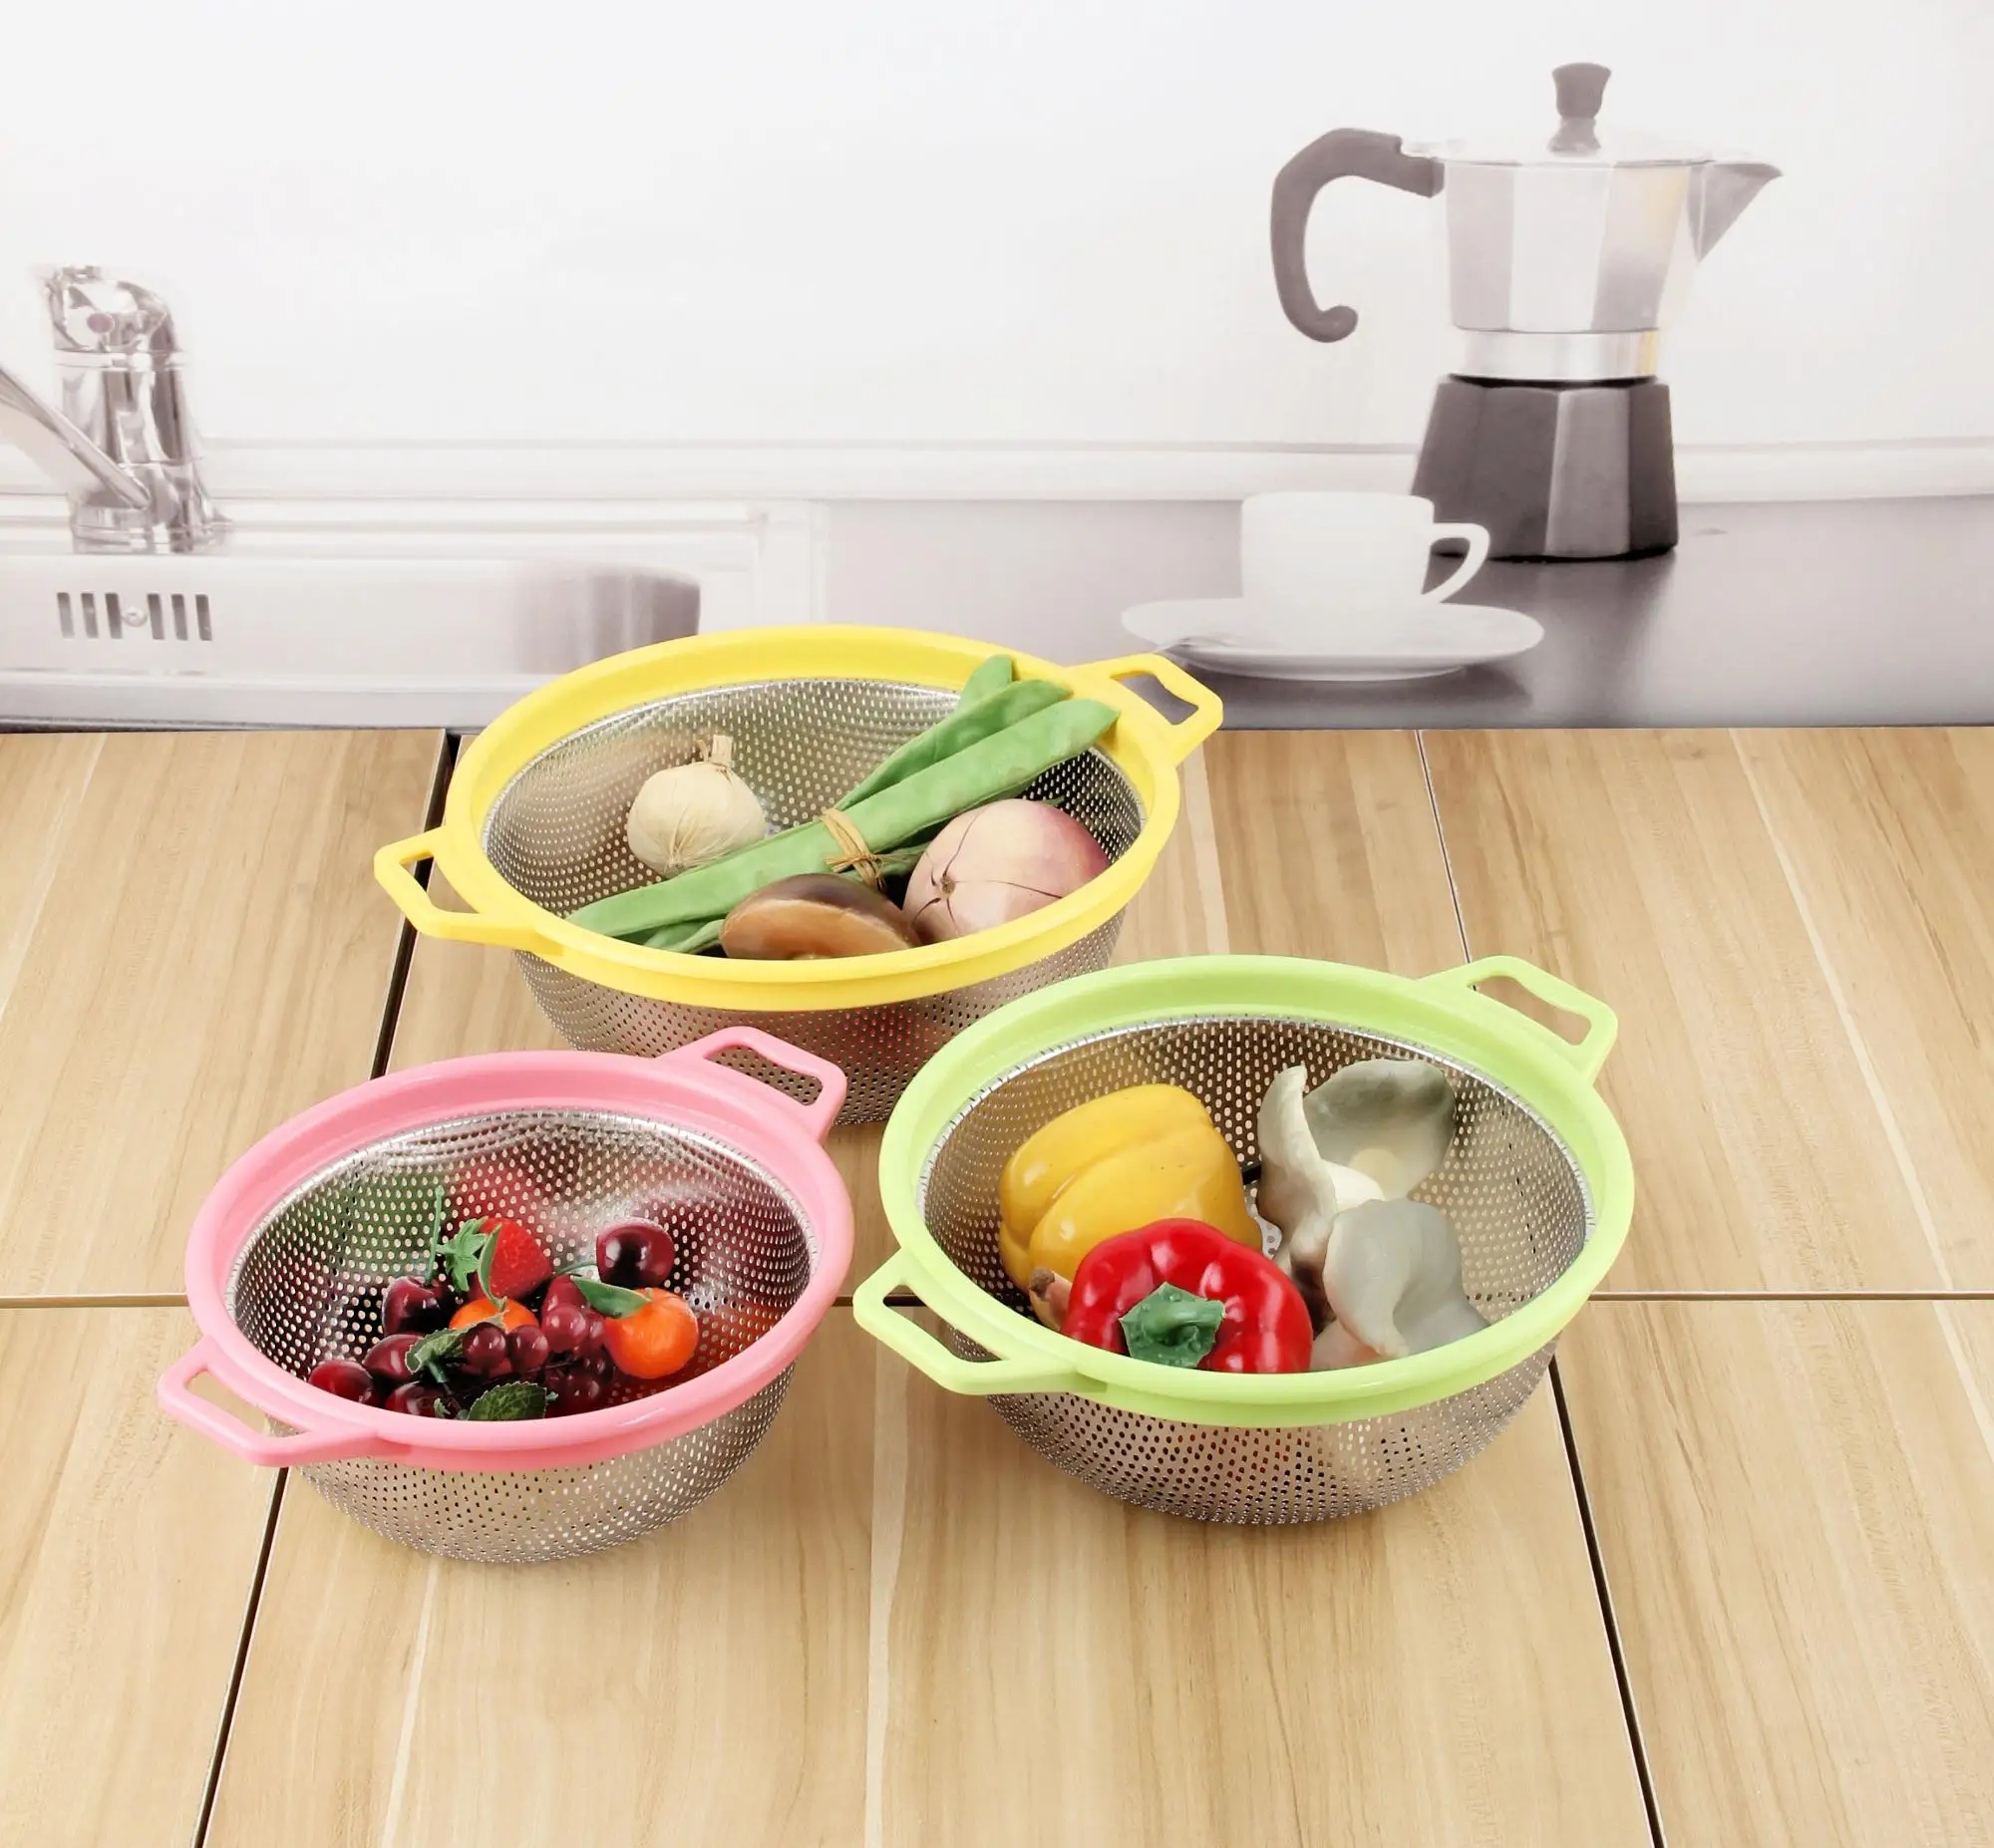 Multi purpose Stainless steel fruit or vegetable basket for kitchen usage